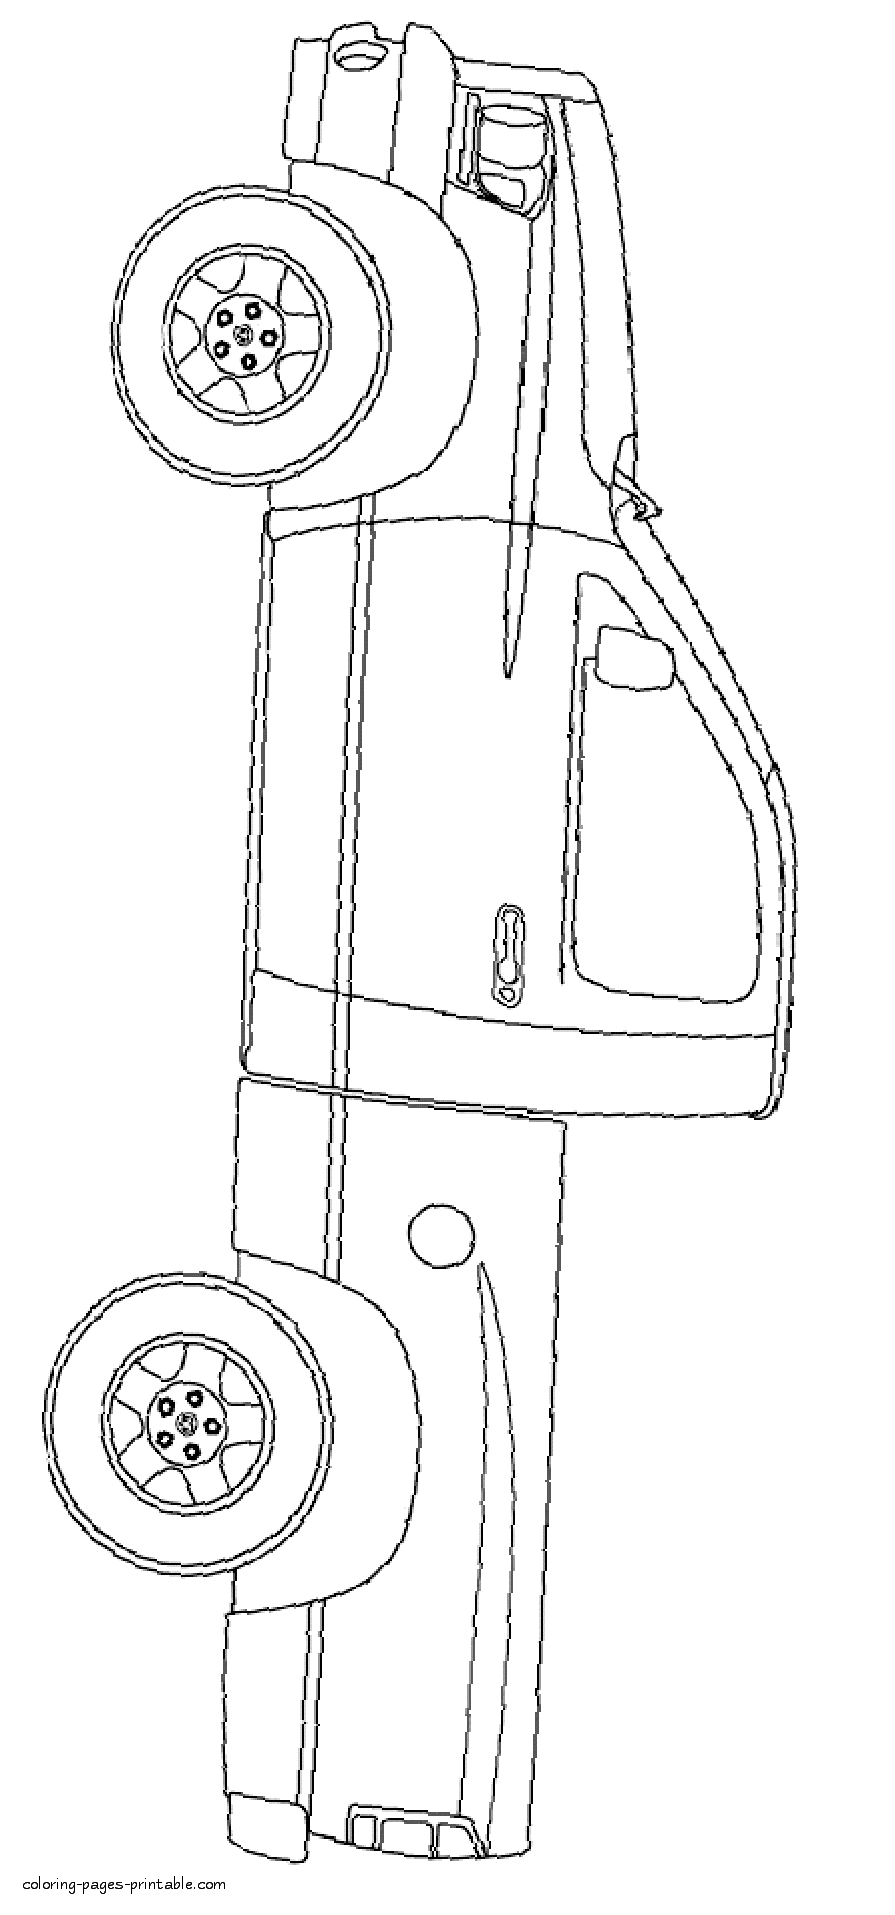 Pickup truck. For boys coloring pages to print